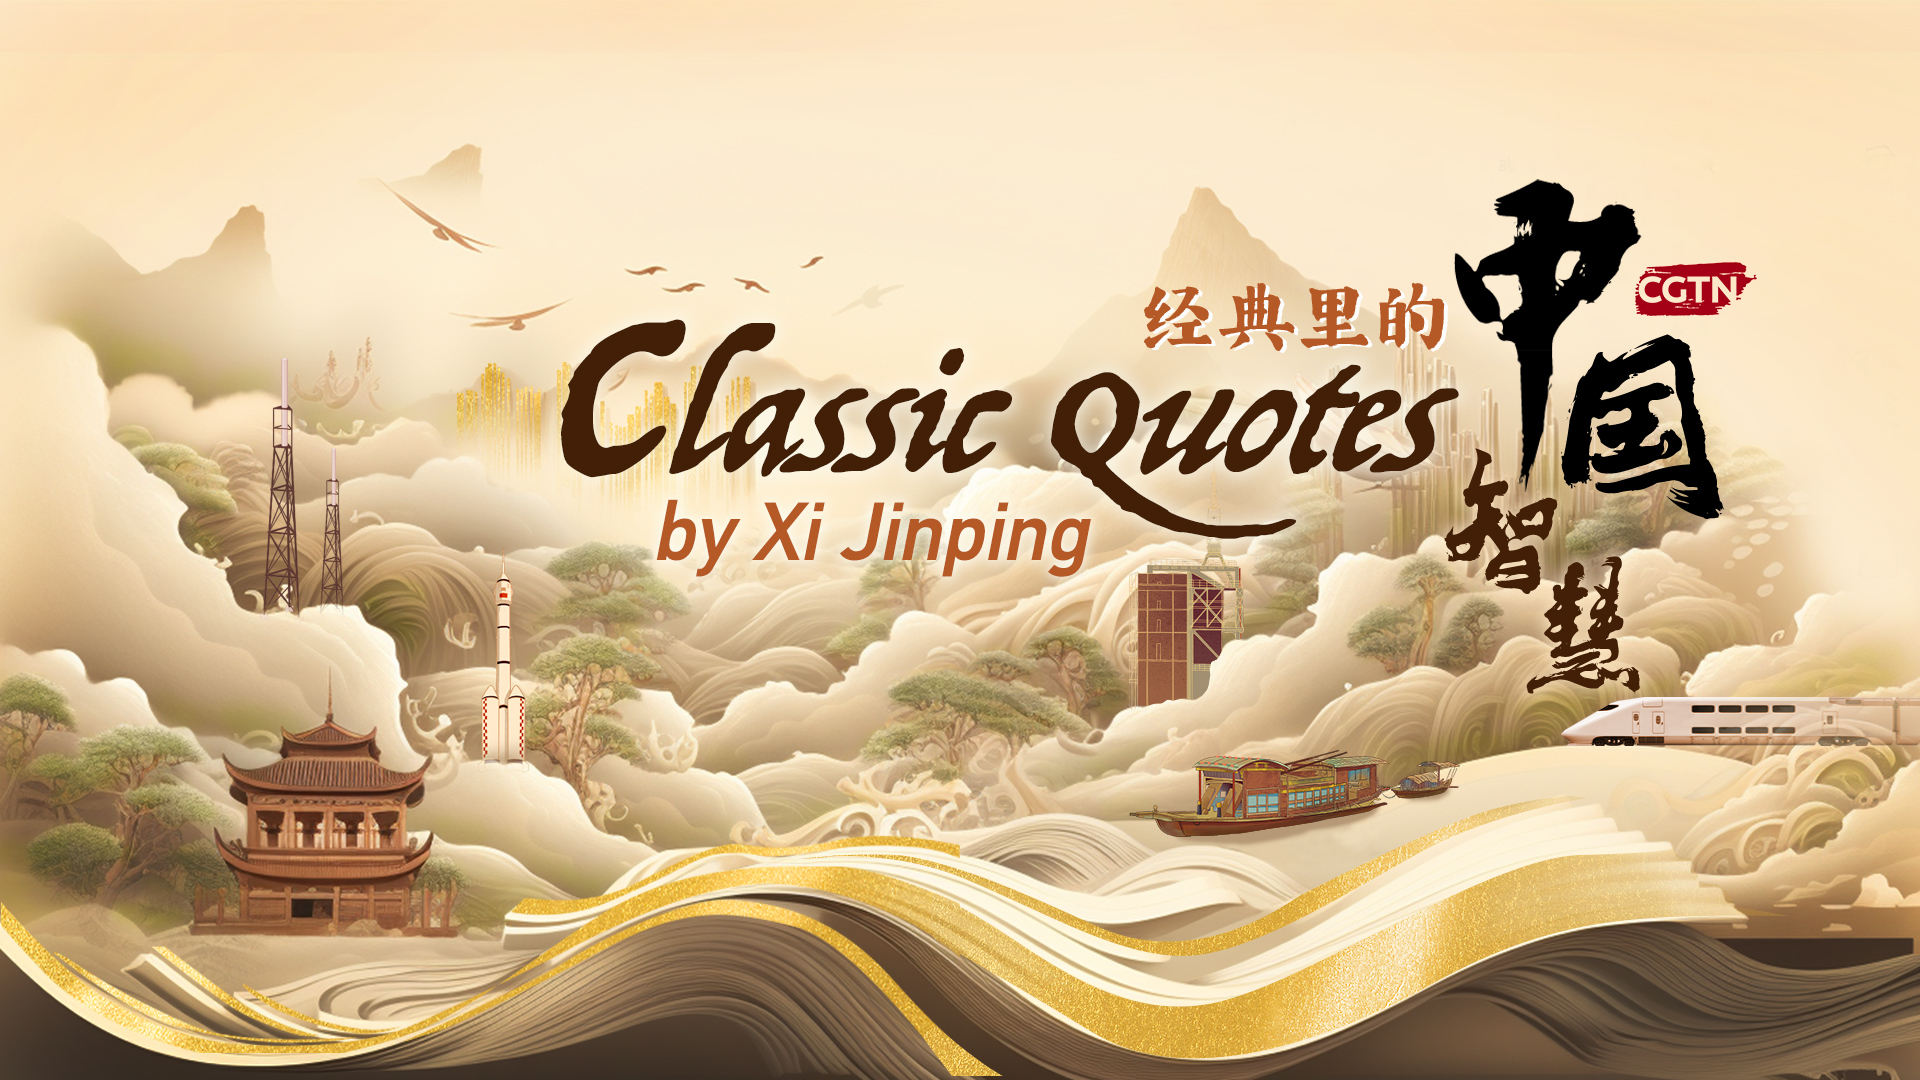 Classic Quotes by Xi Jinping, Season 2 offers multicultural views